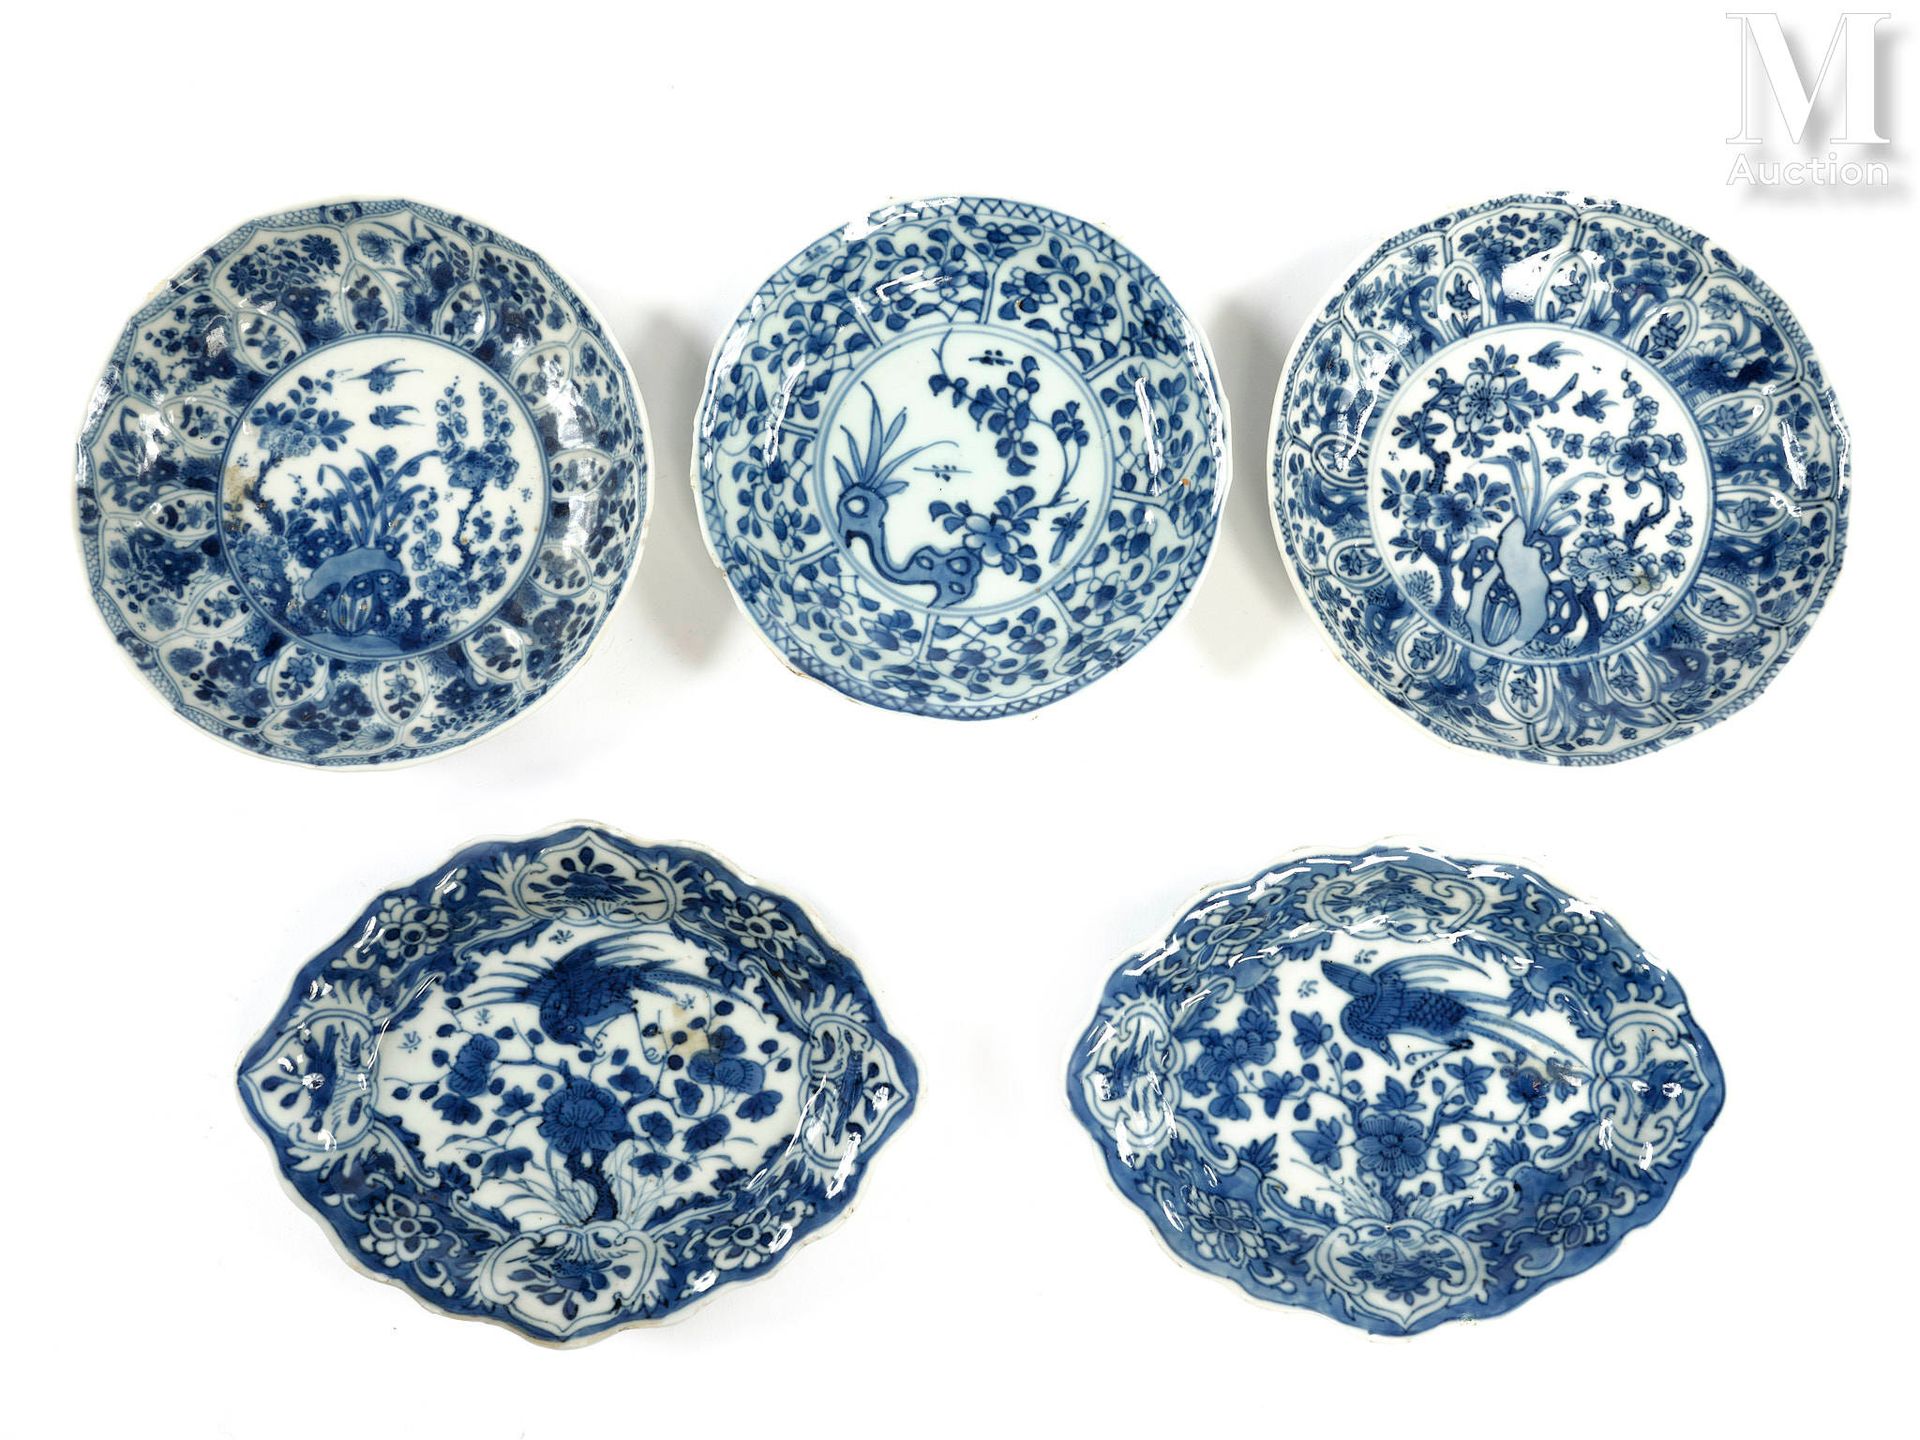 CHINE, XVIIIe siècle Set of blue and white porcelain pieces

including three sma&hellip;